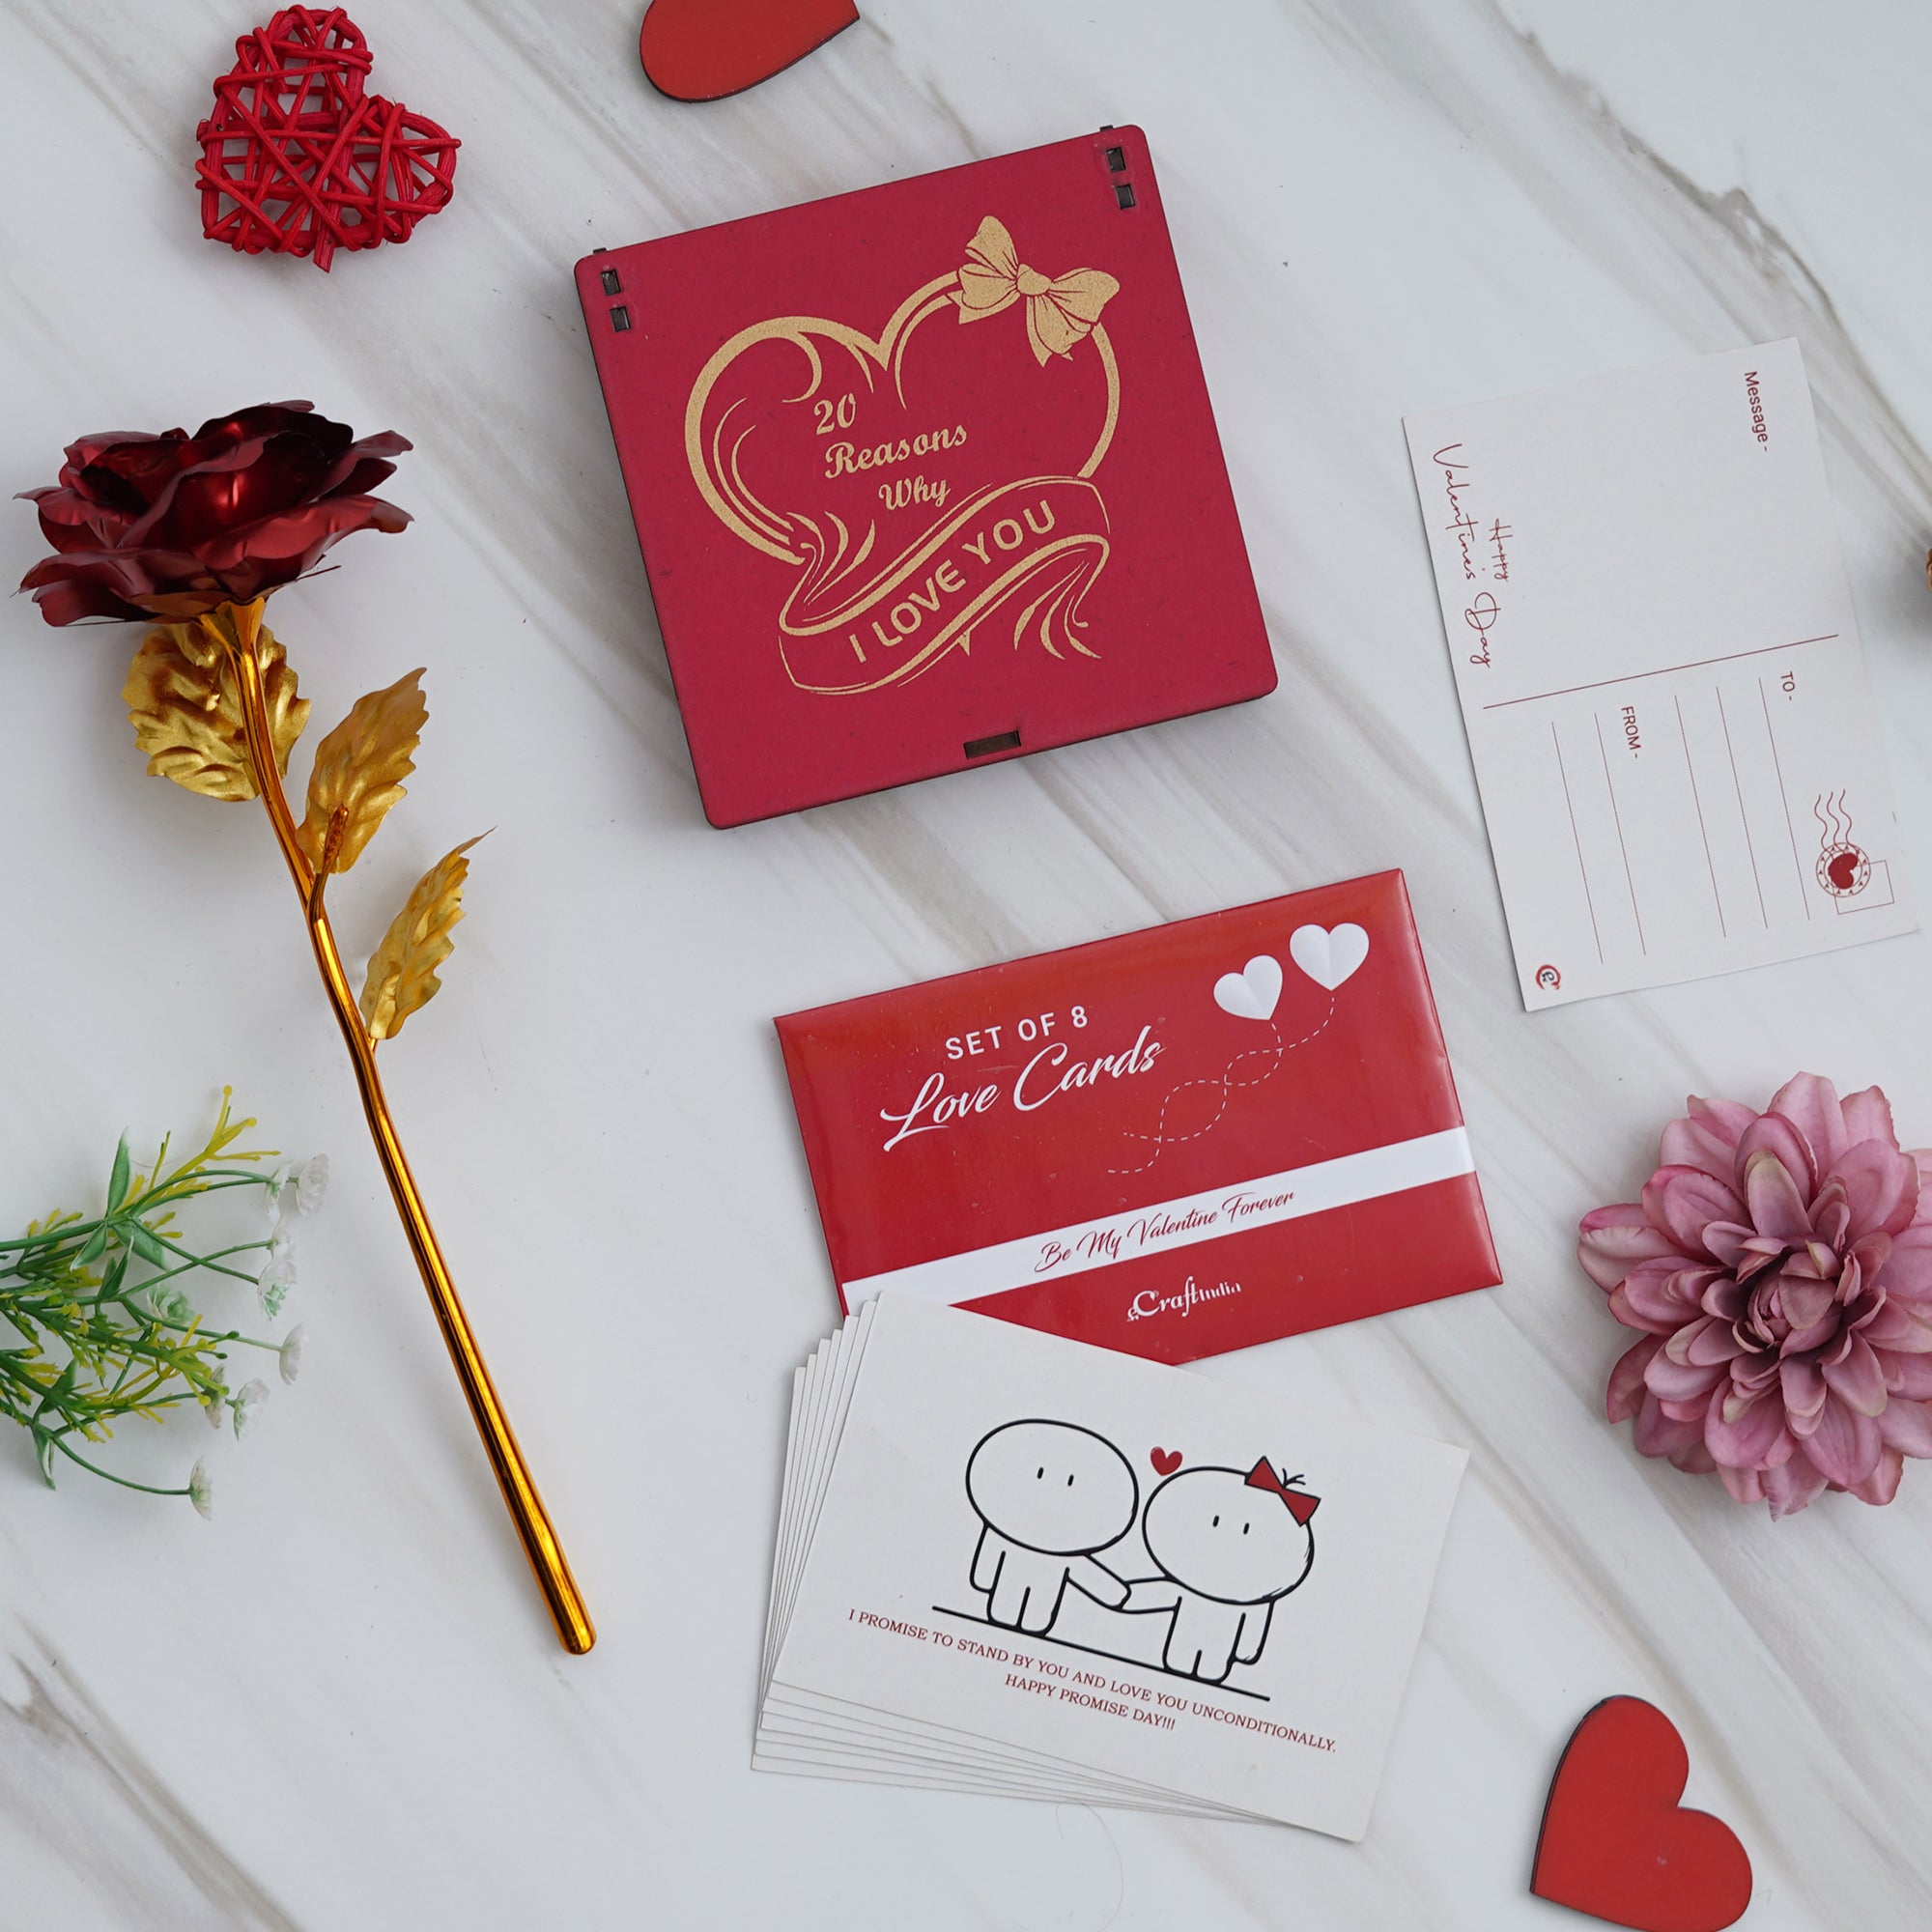 Valentine Combo of Set of 8 Love Post Cards Gift Cards Set, Golden Red Rose Gift Set, "20 Reasons Why I Love You" Printed on Little Red Hearts Decorative Wooden Gift Set Box